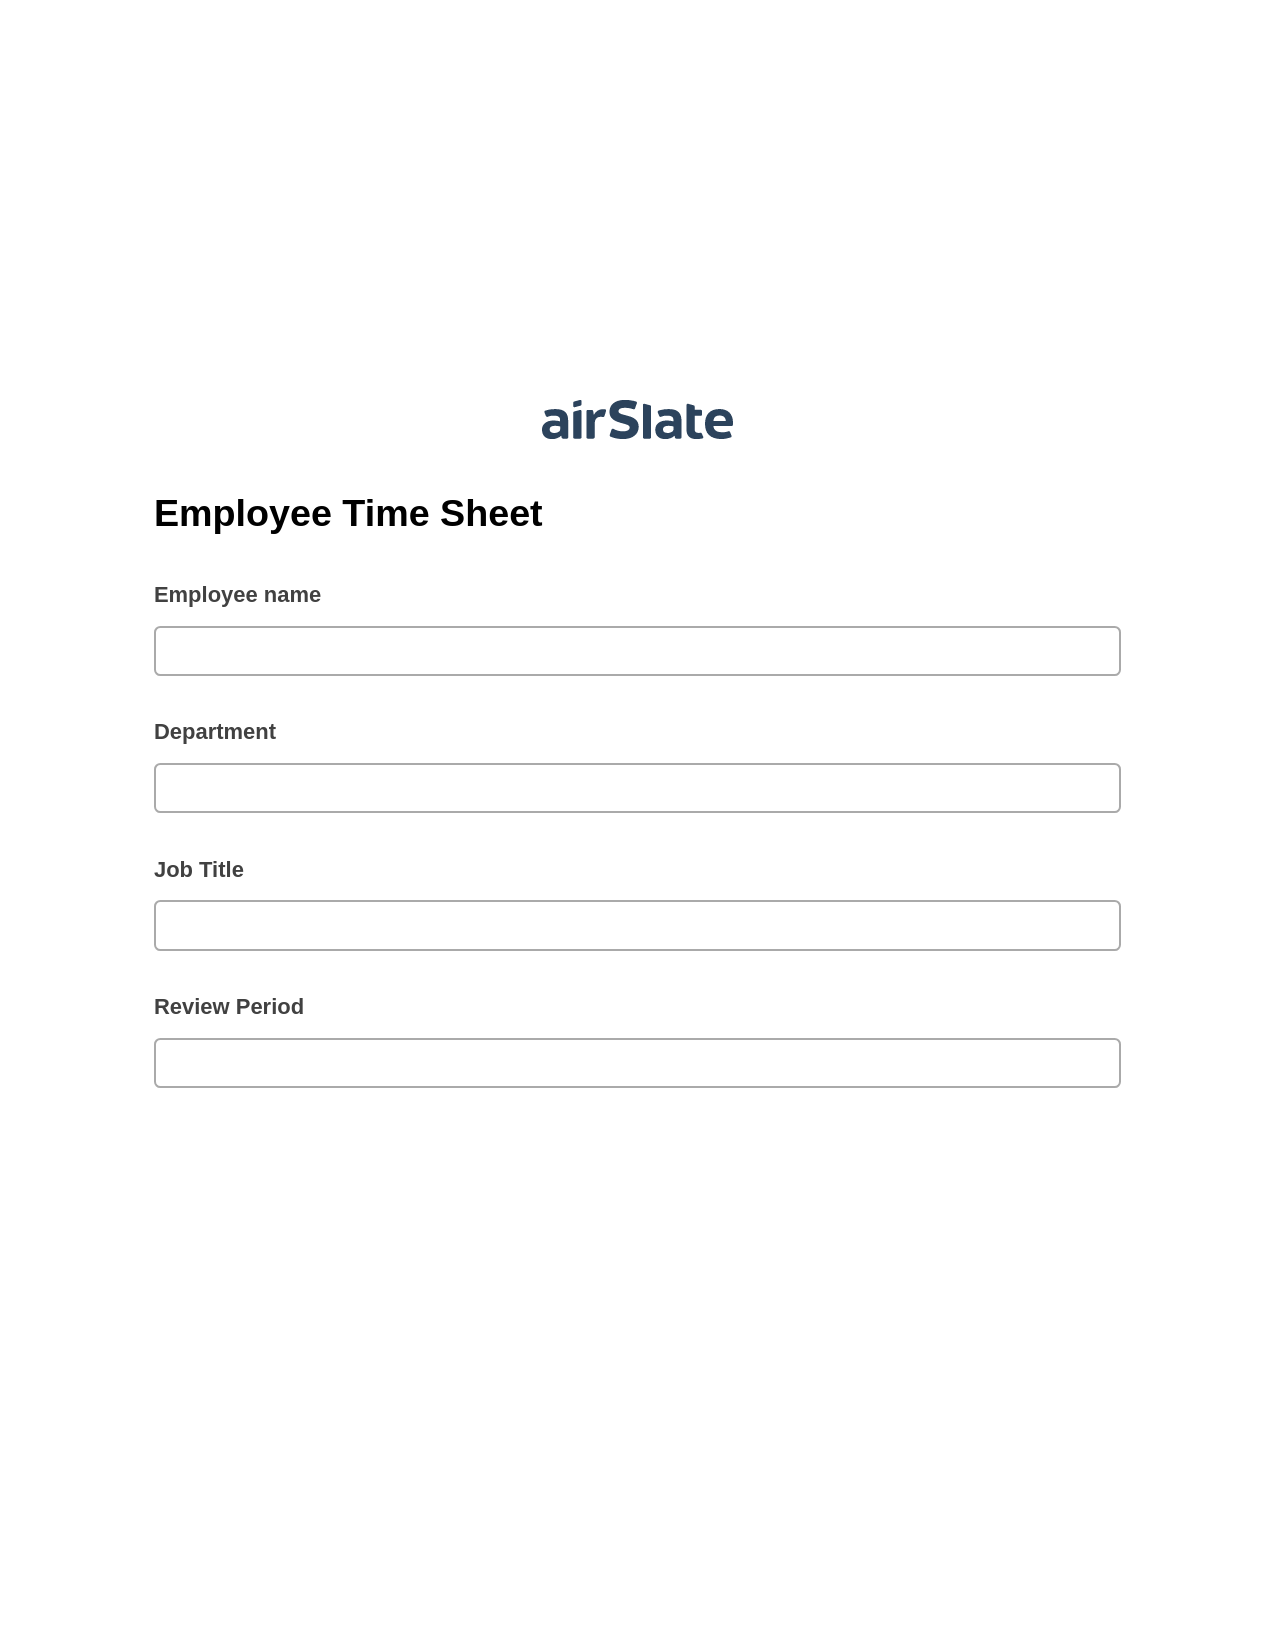 Employee Time Sheet Pre-fill Dropdowns from Google Sheet Bot, Mailchimp add recipient to audience Bot, Archive to Google Drive Bot